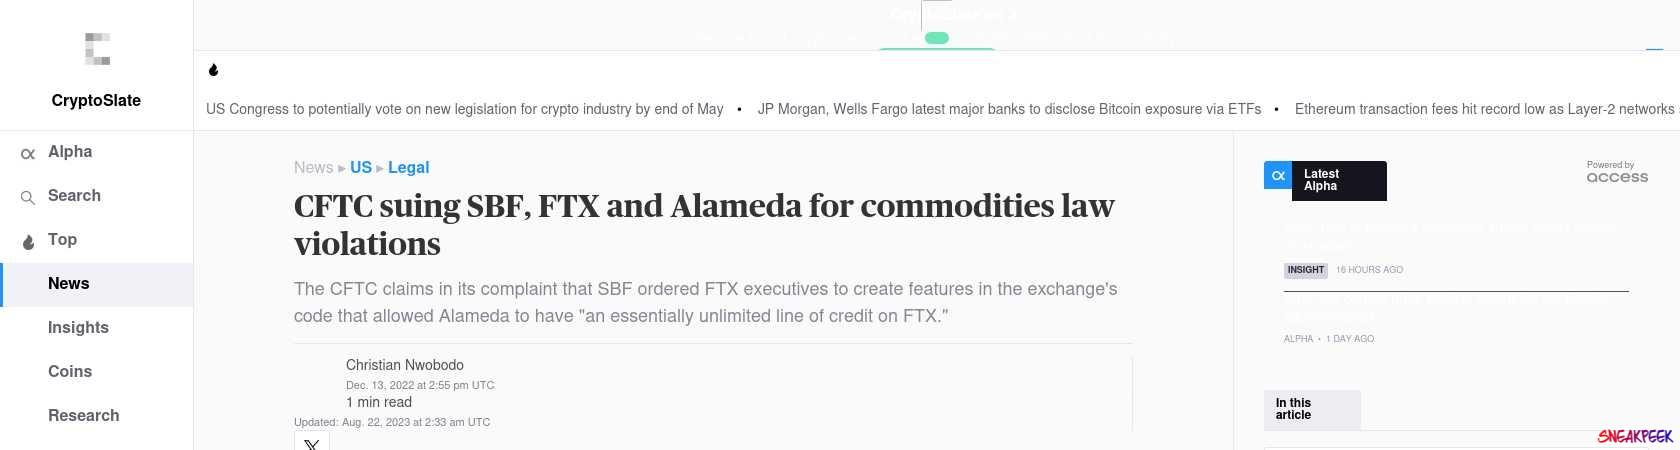 Read the full Article:  ⭲ CFTC suing SBF, FTX and Alameda for commodities law violations